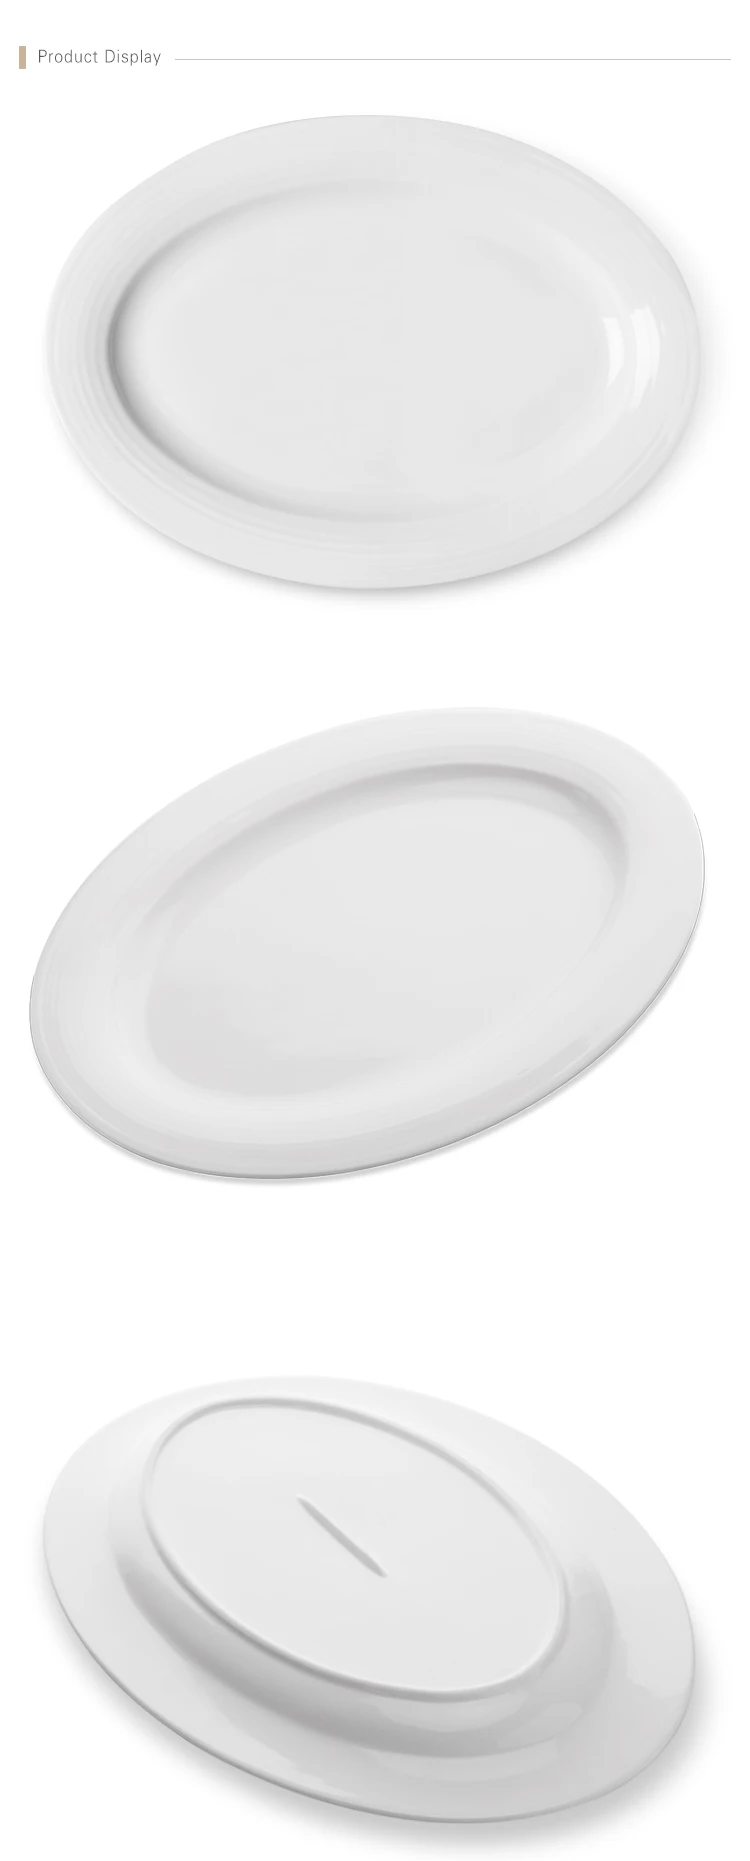 Buffet Restaurant Table Ware Porcelain, Event Chinese Dinnerware, Catering Serving Dishes Oval Fish Plates*